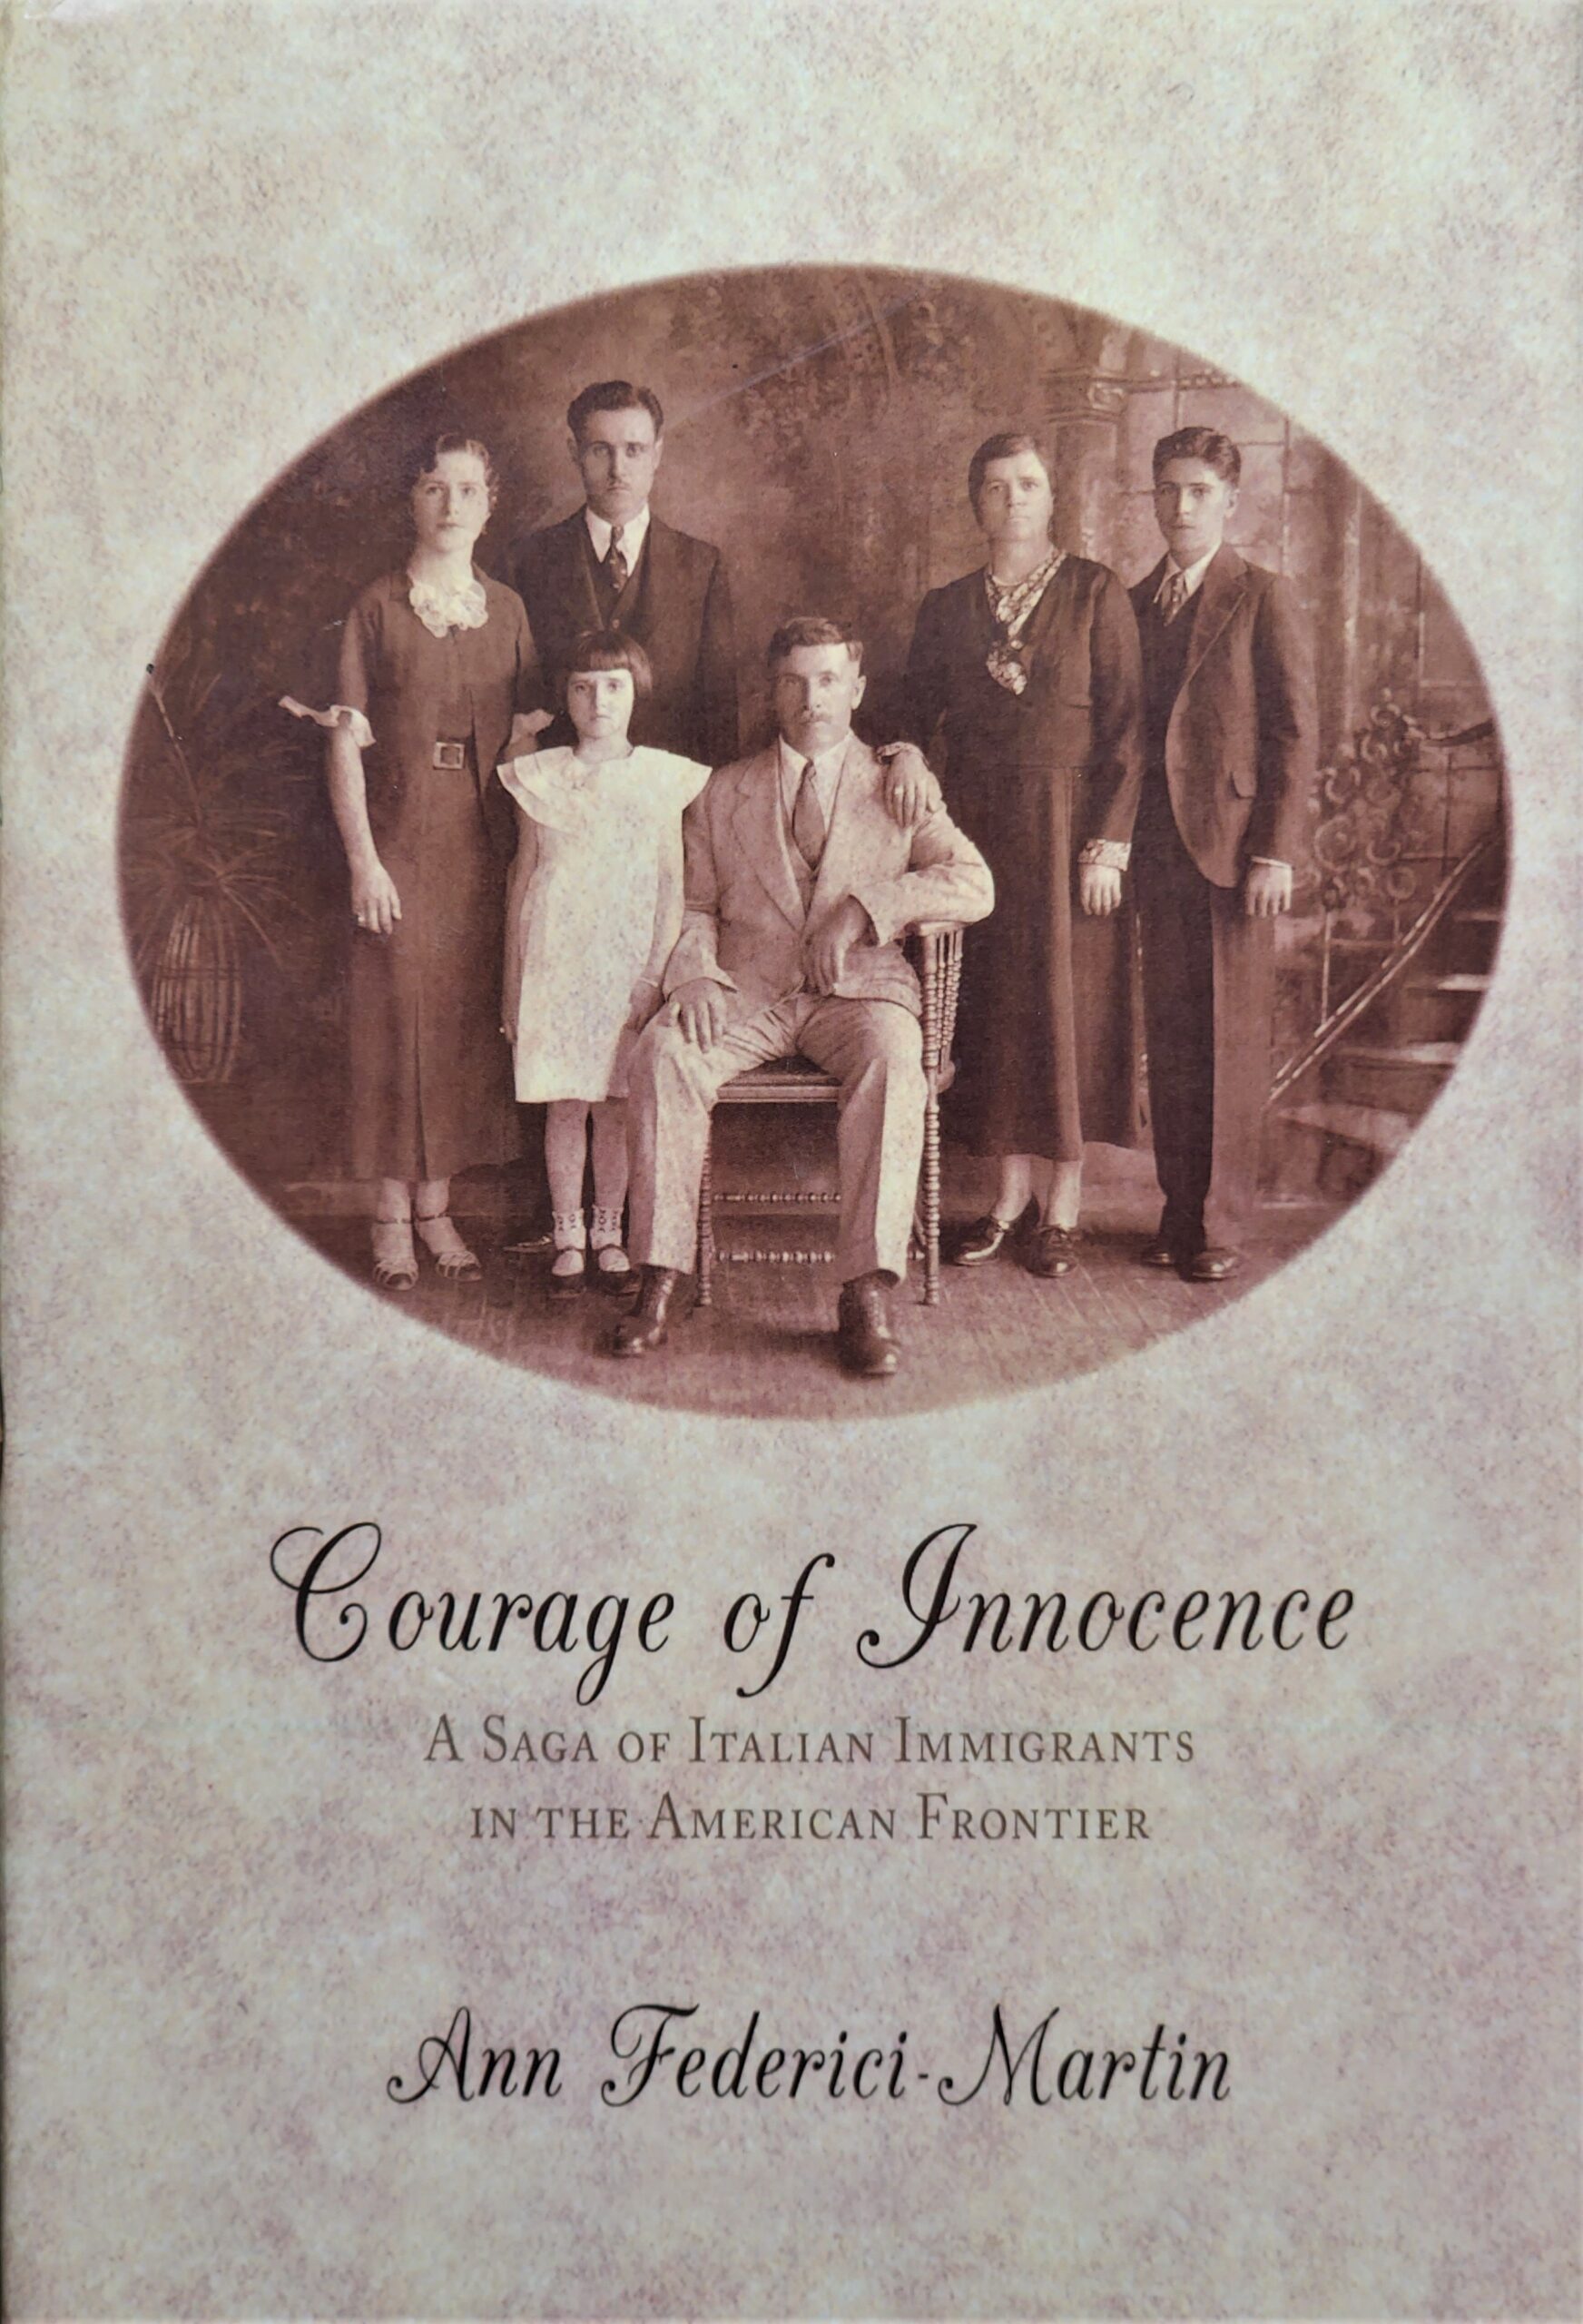 Courage of Innocence: A Saga of Italian Immigrants in the American Frontier by Ann Federici-Martin